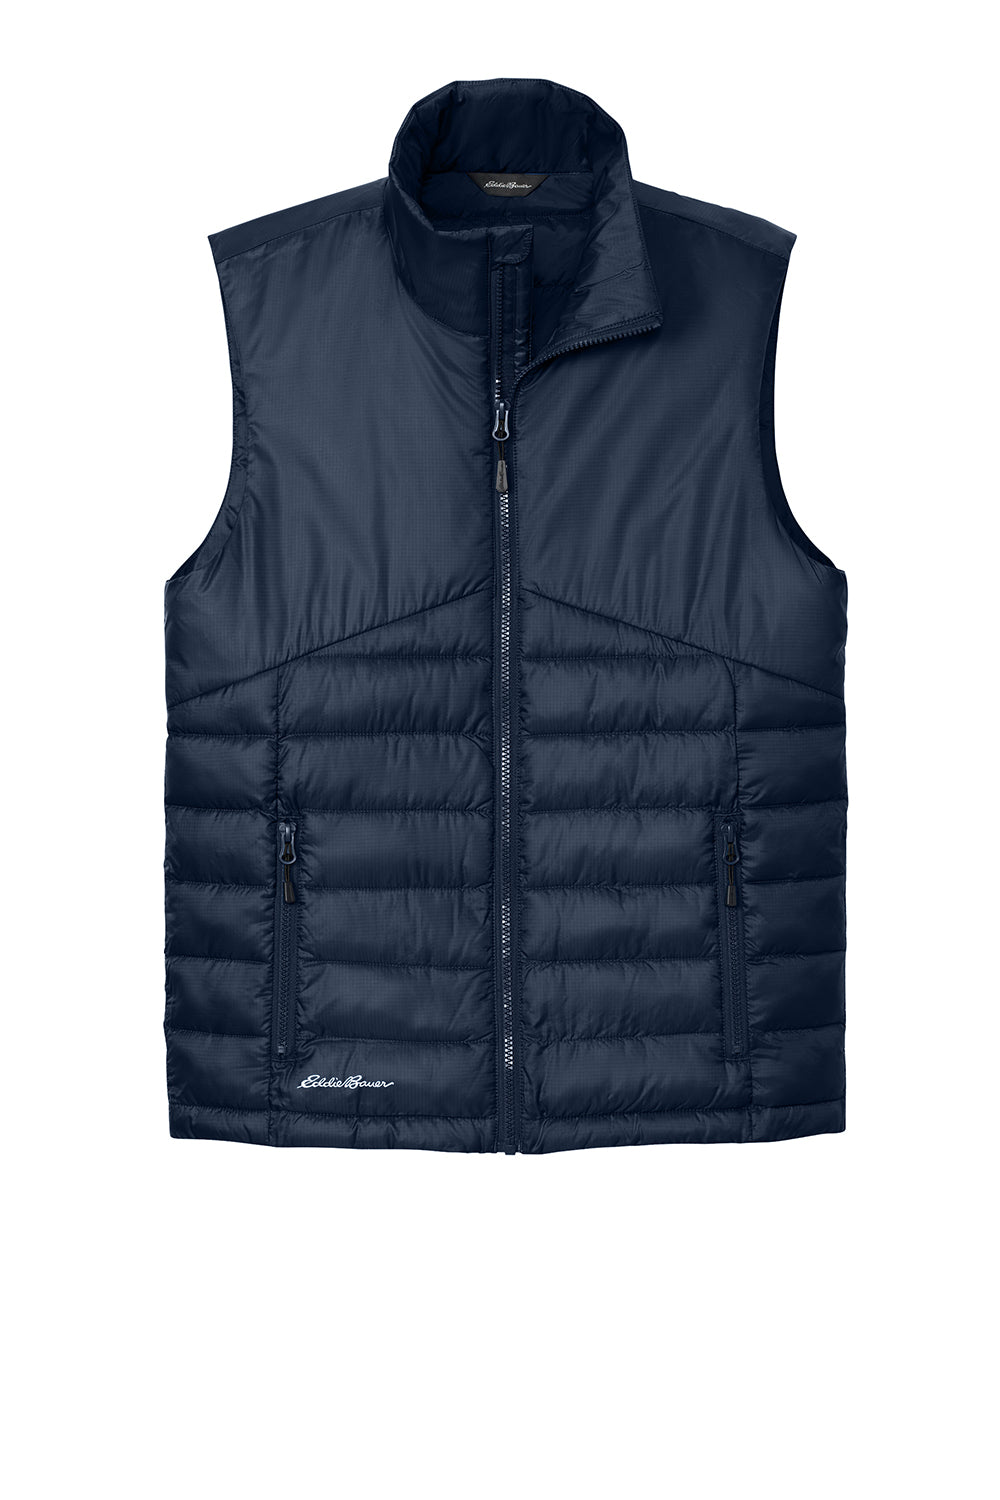 Eddie Bauer EB512 Mens Water Resistant Quilted Full Zip Vest River Navy Blue Flat Front